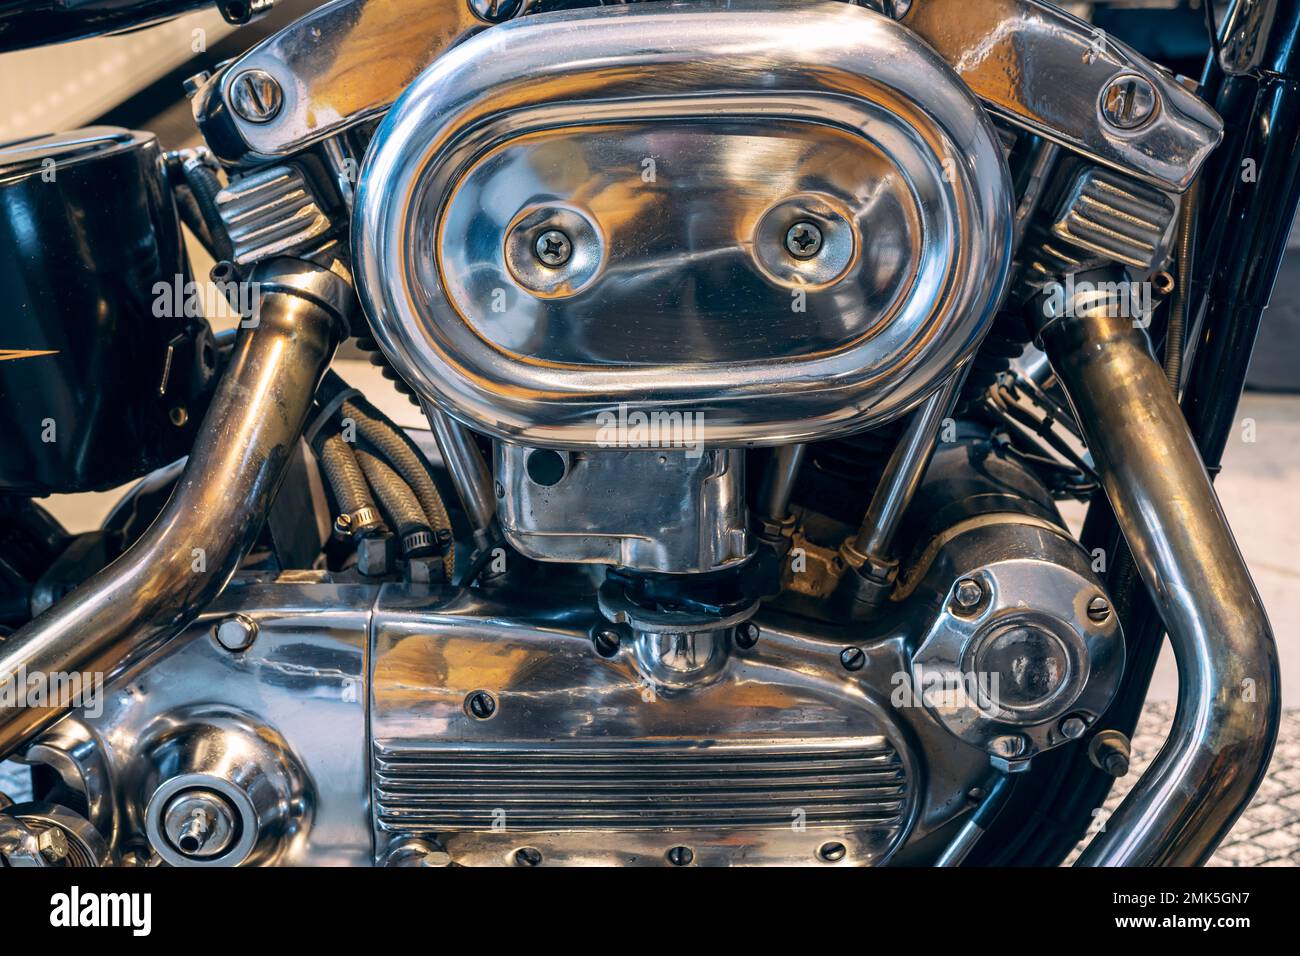 Fragment of v-twin engine in old-fashioned chopper. Chrome motor housing. Stock Photo